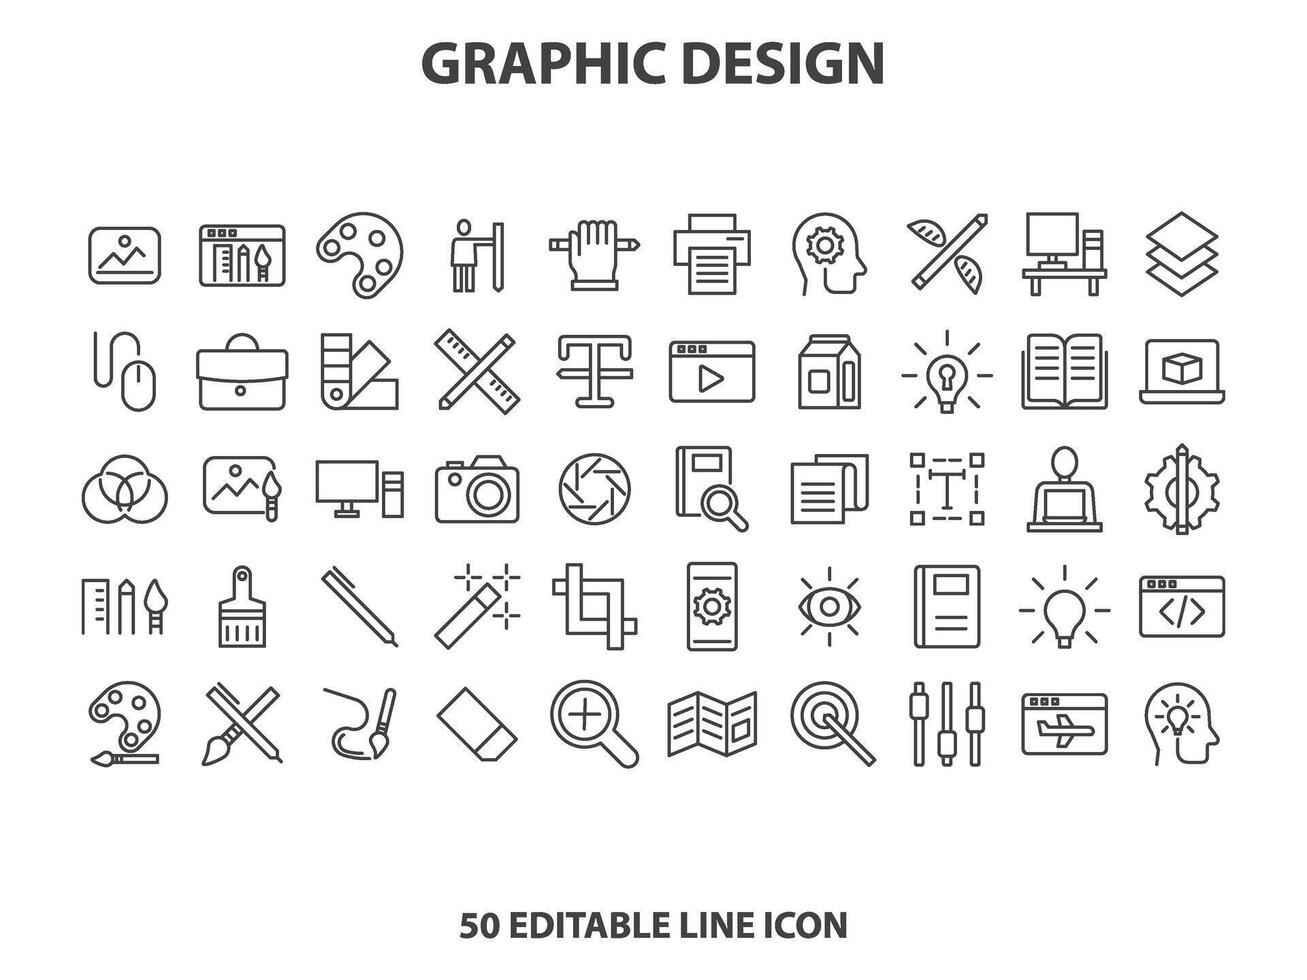 Graphic Design and Creativity Line Icons. Editable Stroke. Pixel Perfect. For Mobile and Web. Contains such icons as Creativity, Layout, Mobile App Design, Art Tools, Typography, vector